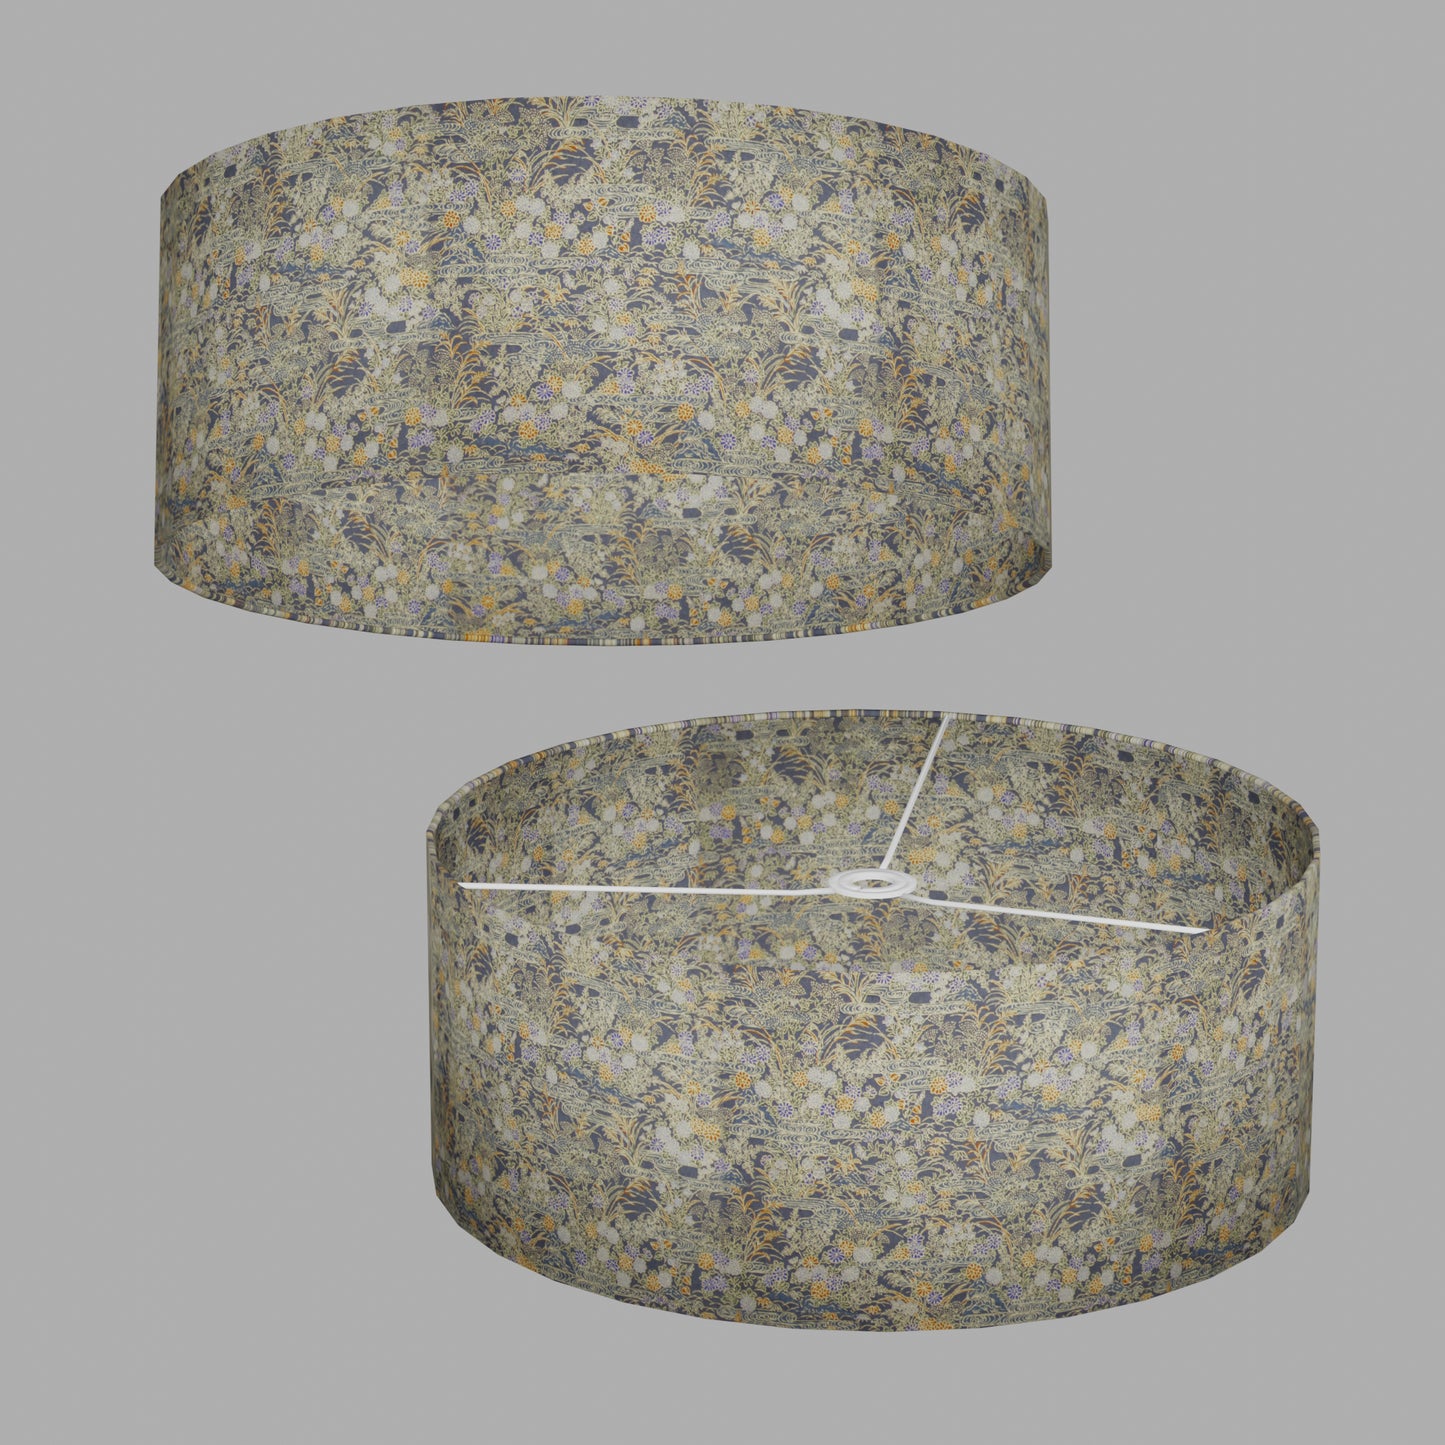 Drum Lamp Shade - W08 ~ Lily Pond, 50cm(d) x 20cm(h)